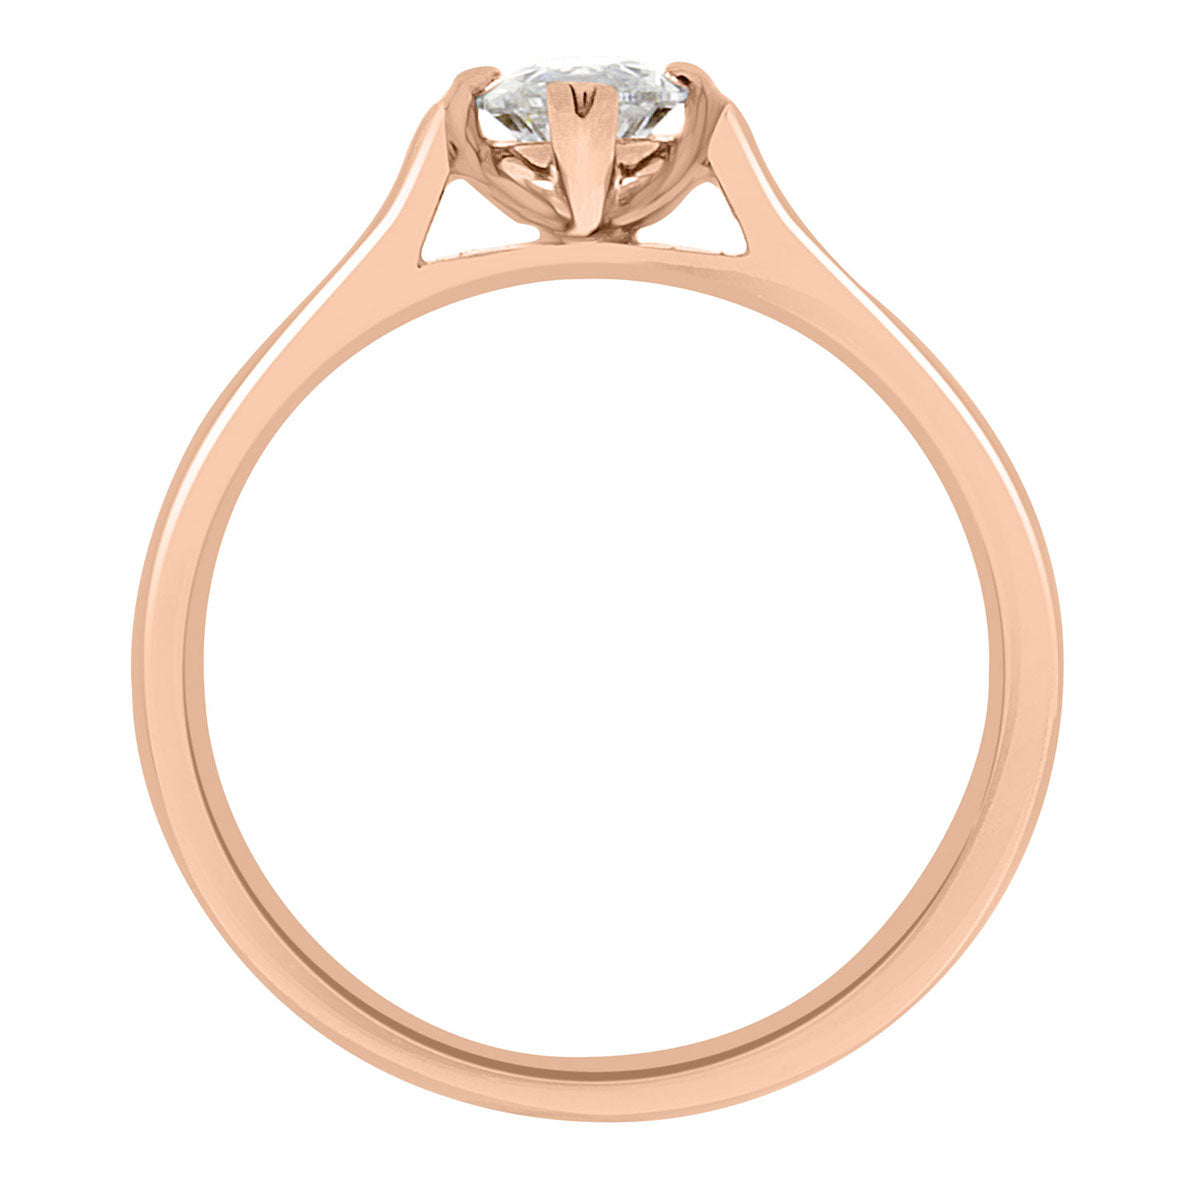 Marquise Solitaire Engagement Ring made from rose gold pictured standing upright